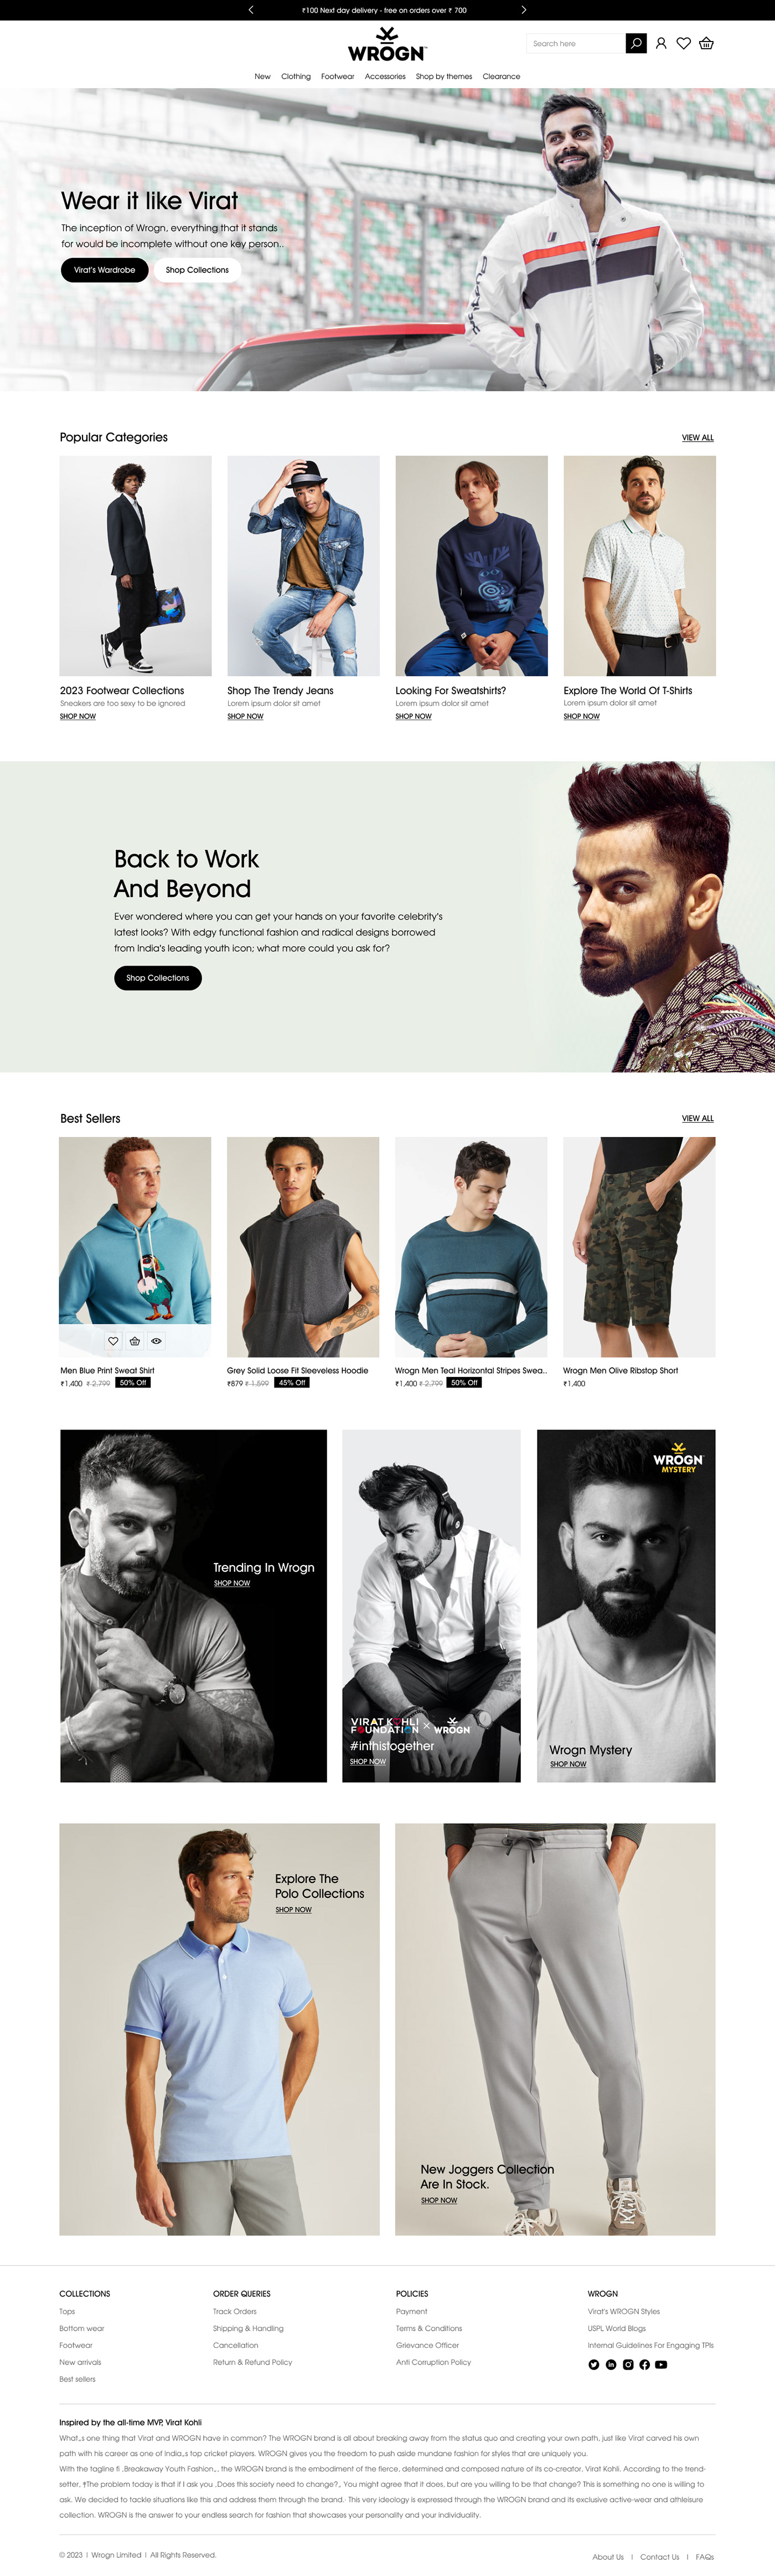 Clothing Ecommerce Figma landing page ui design UI/UX user experience user interface Web Design  Website